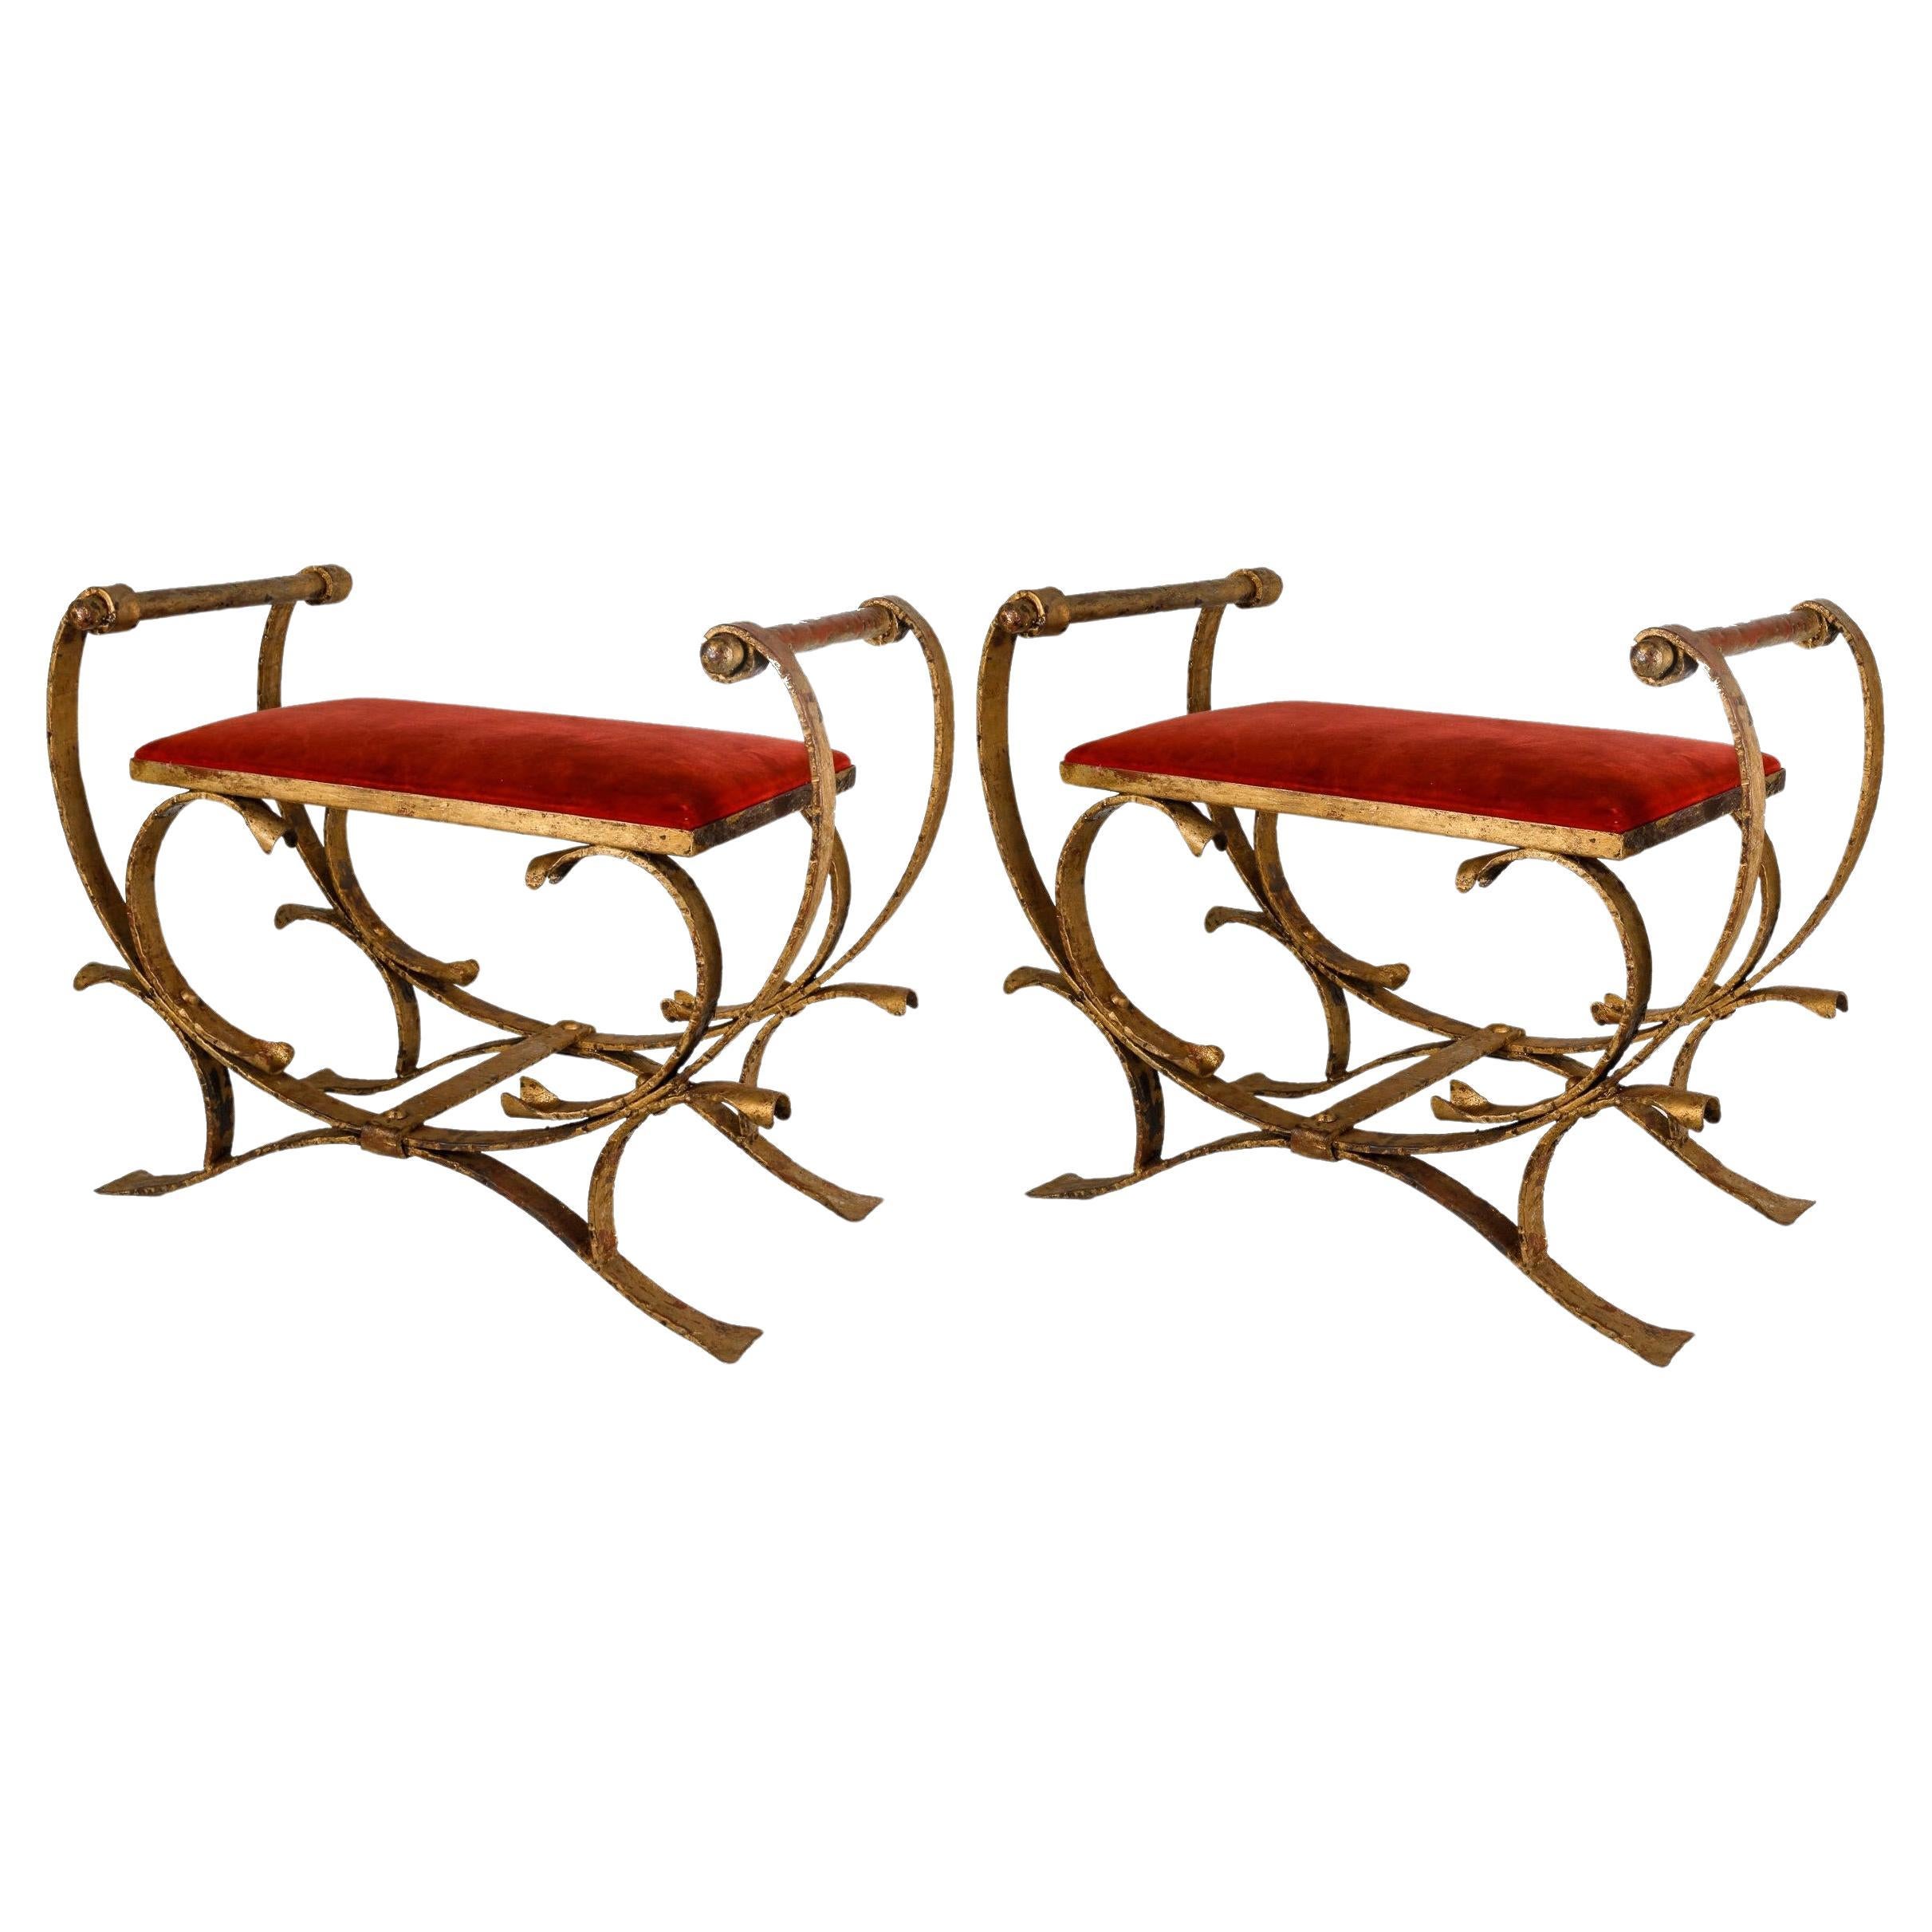 Pair of Gilded Wrought Iron Curule Stools and Seats, Early 20th Century.